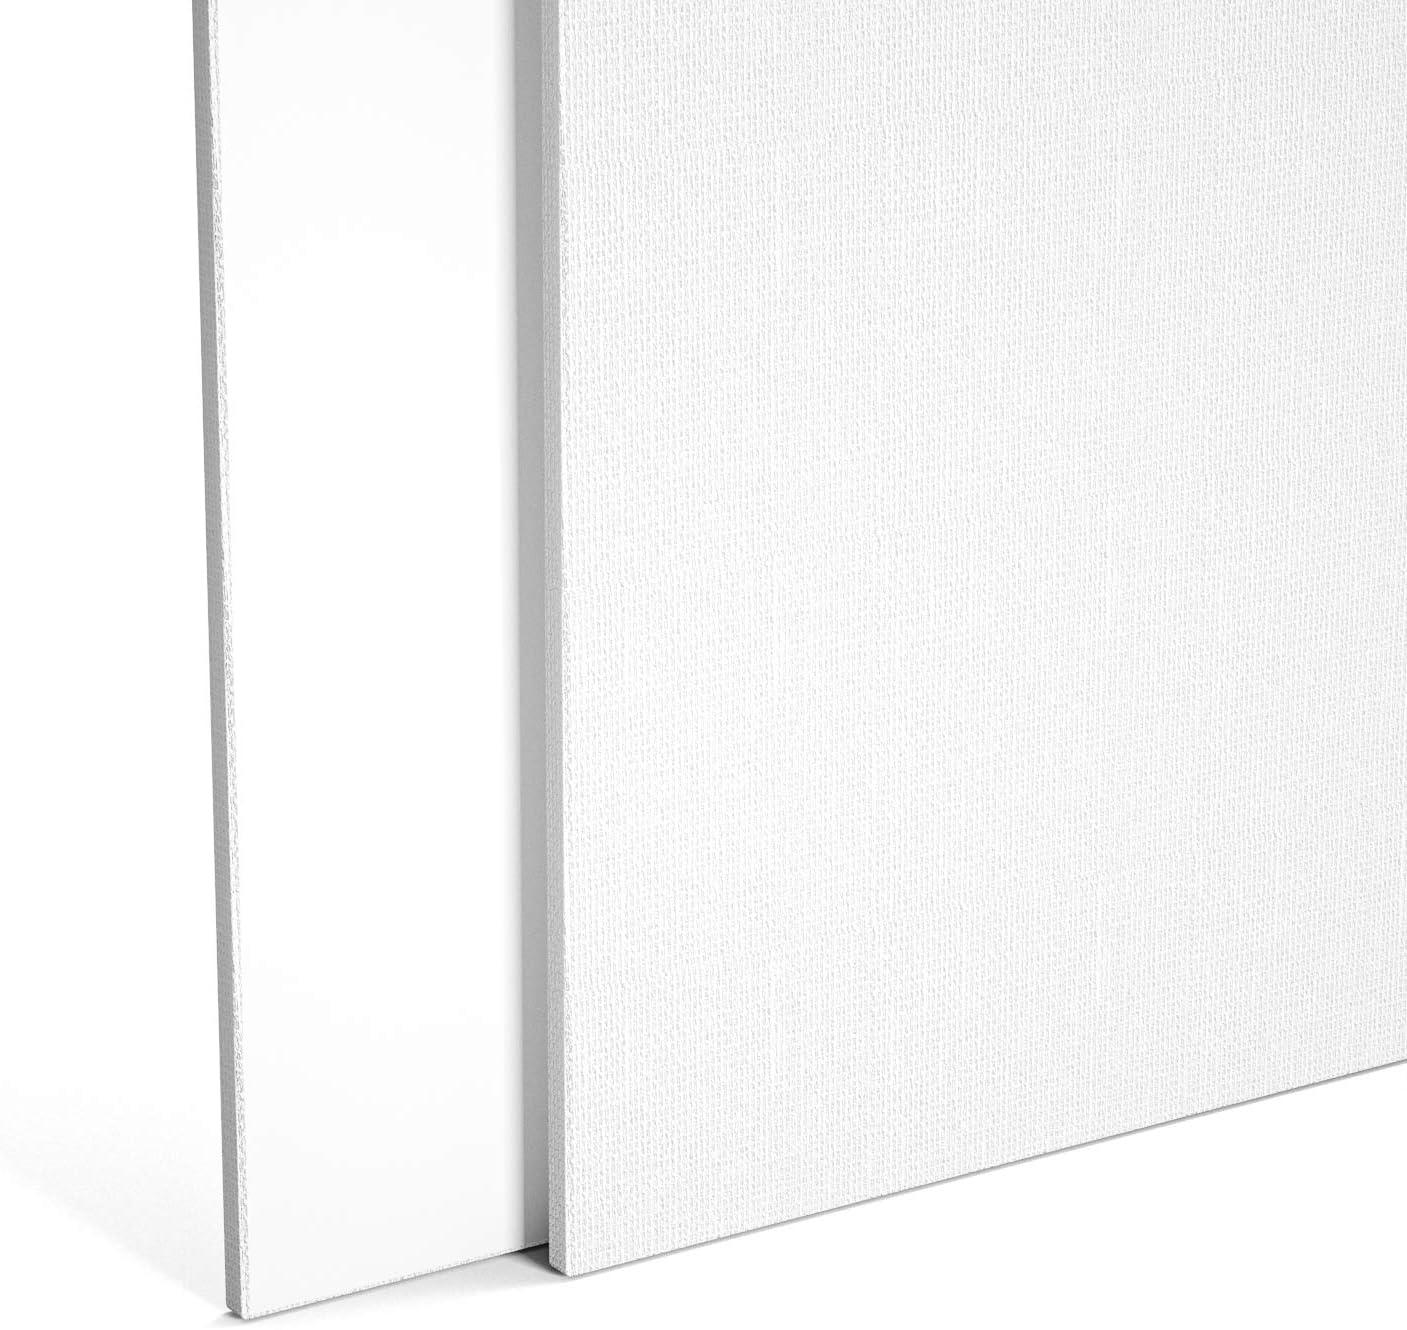 gotideal canvases for painting, 11x14 inch of 7, professional primed white  blank flat canvas panels- 100% cotton artist canv